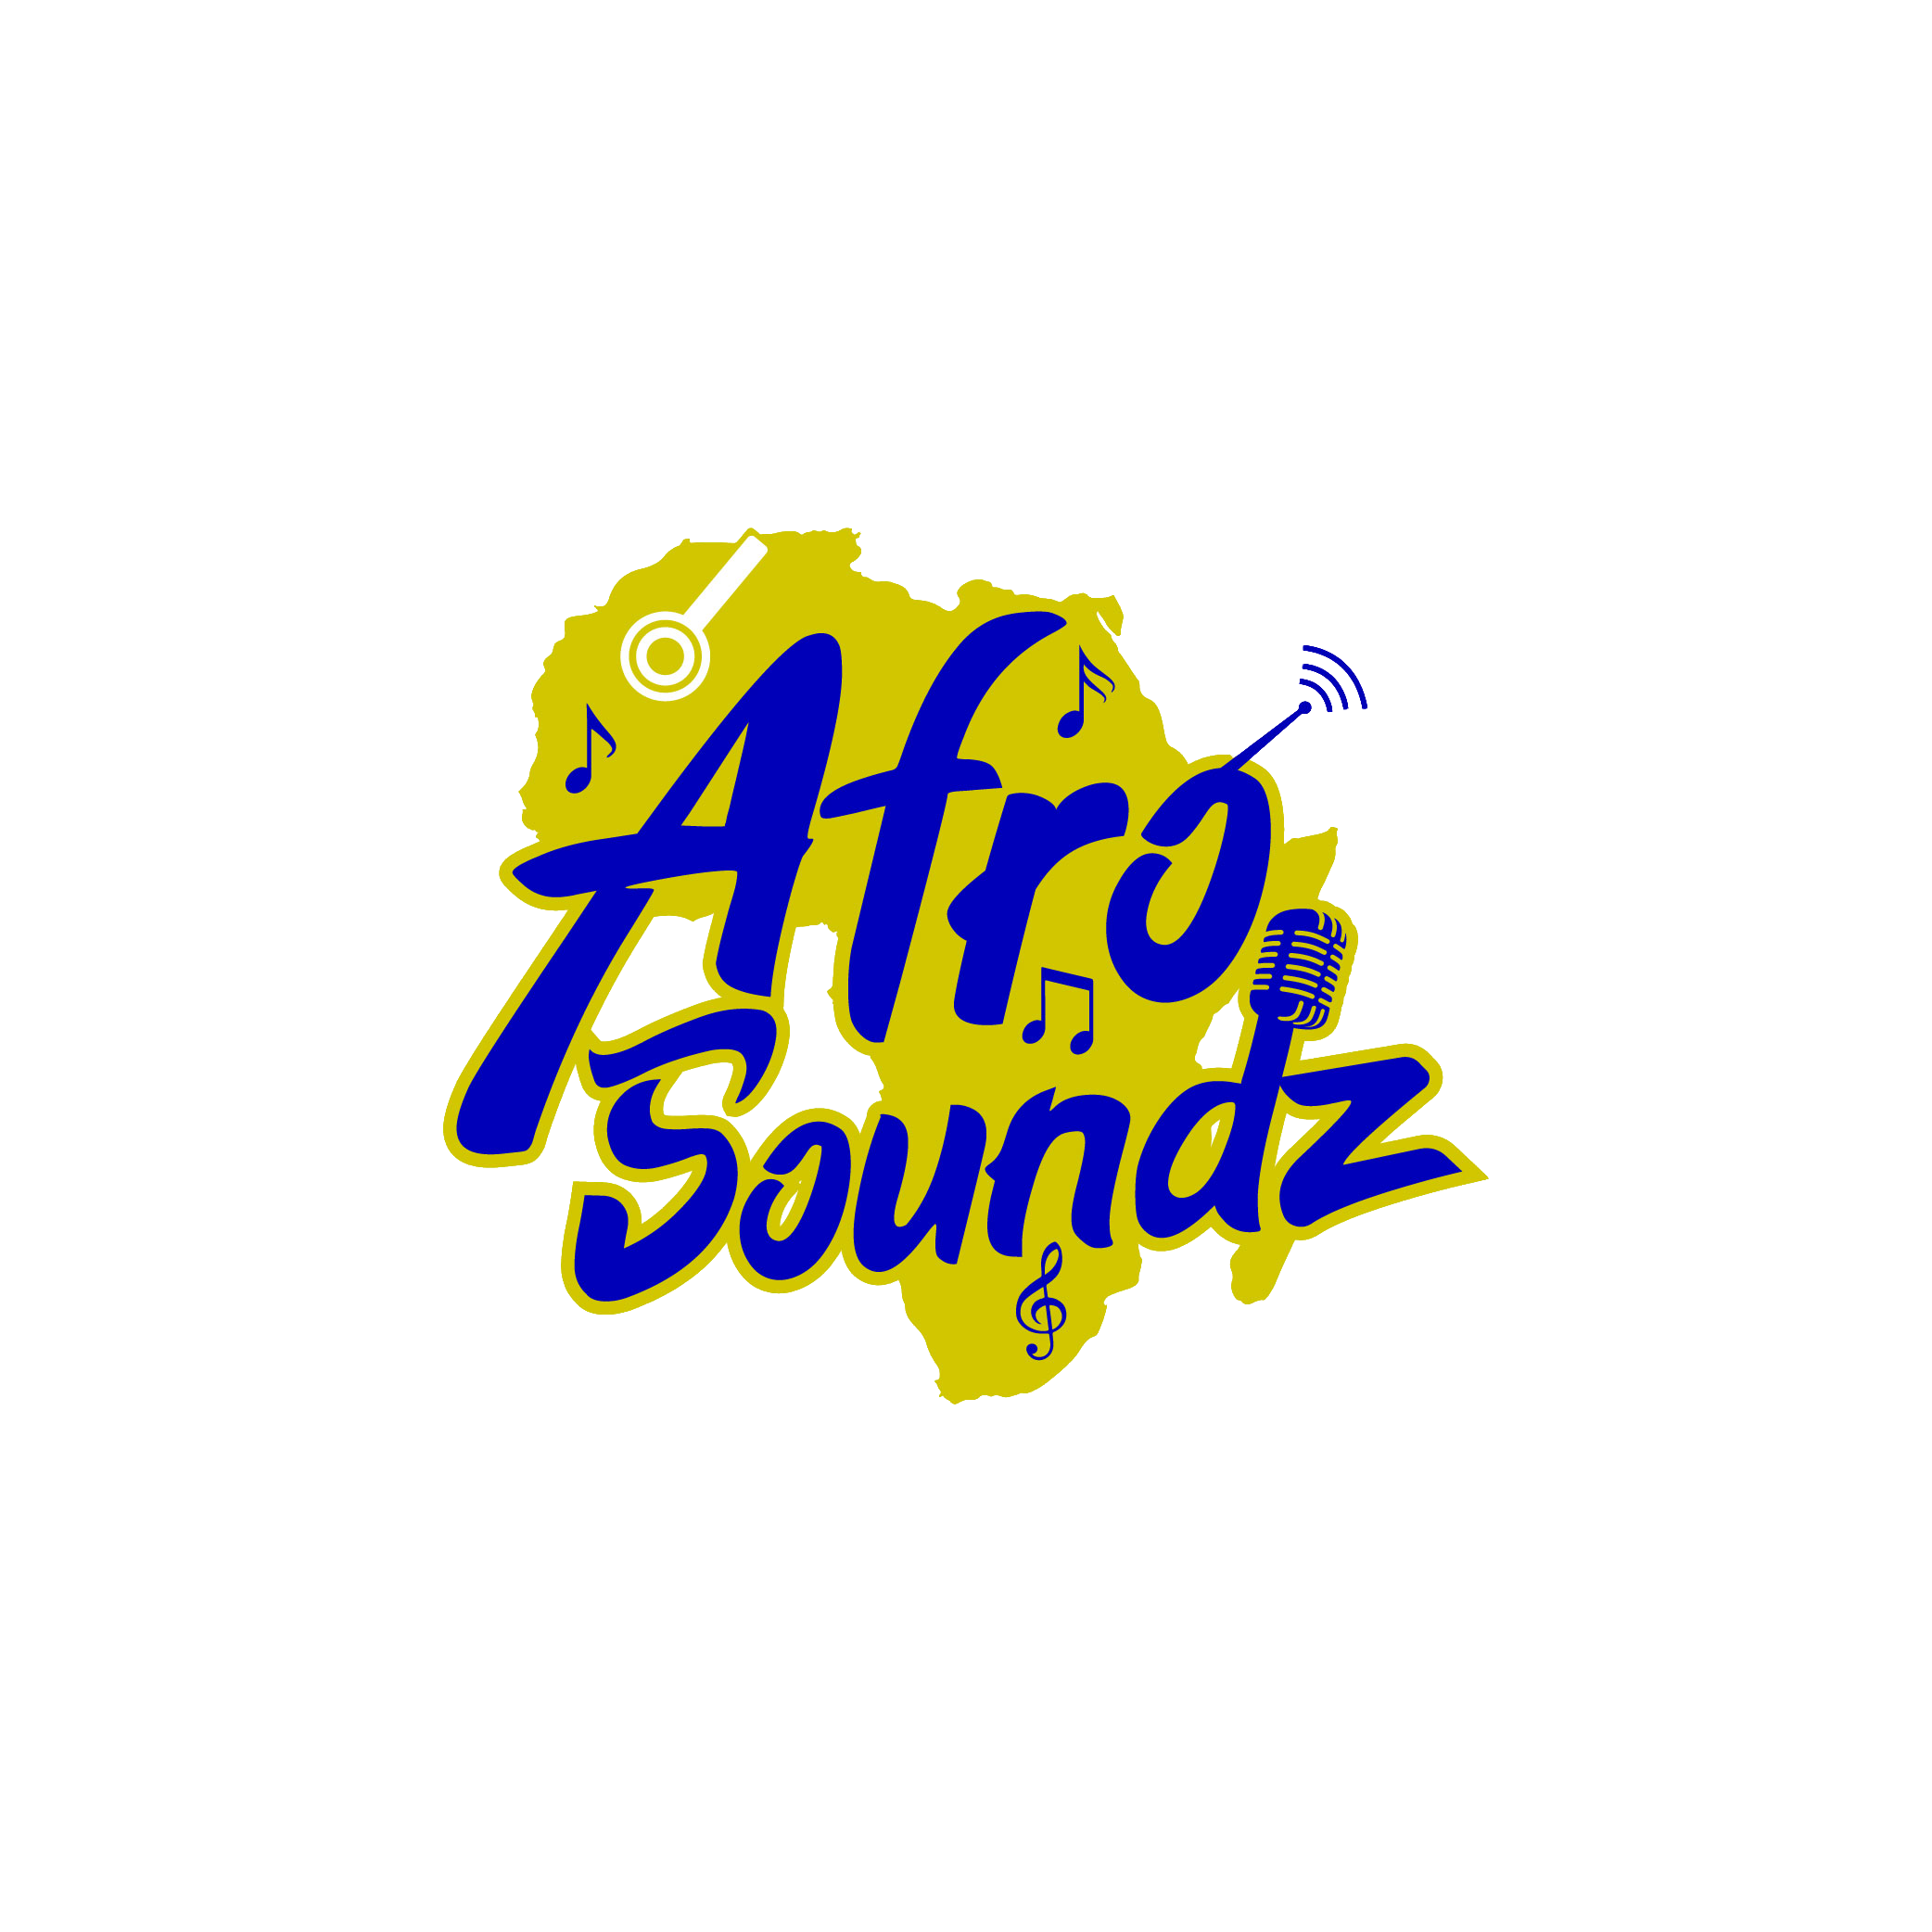 Art for Afro Soundz ID 6 by Afrosoundz